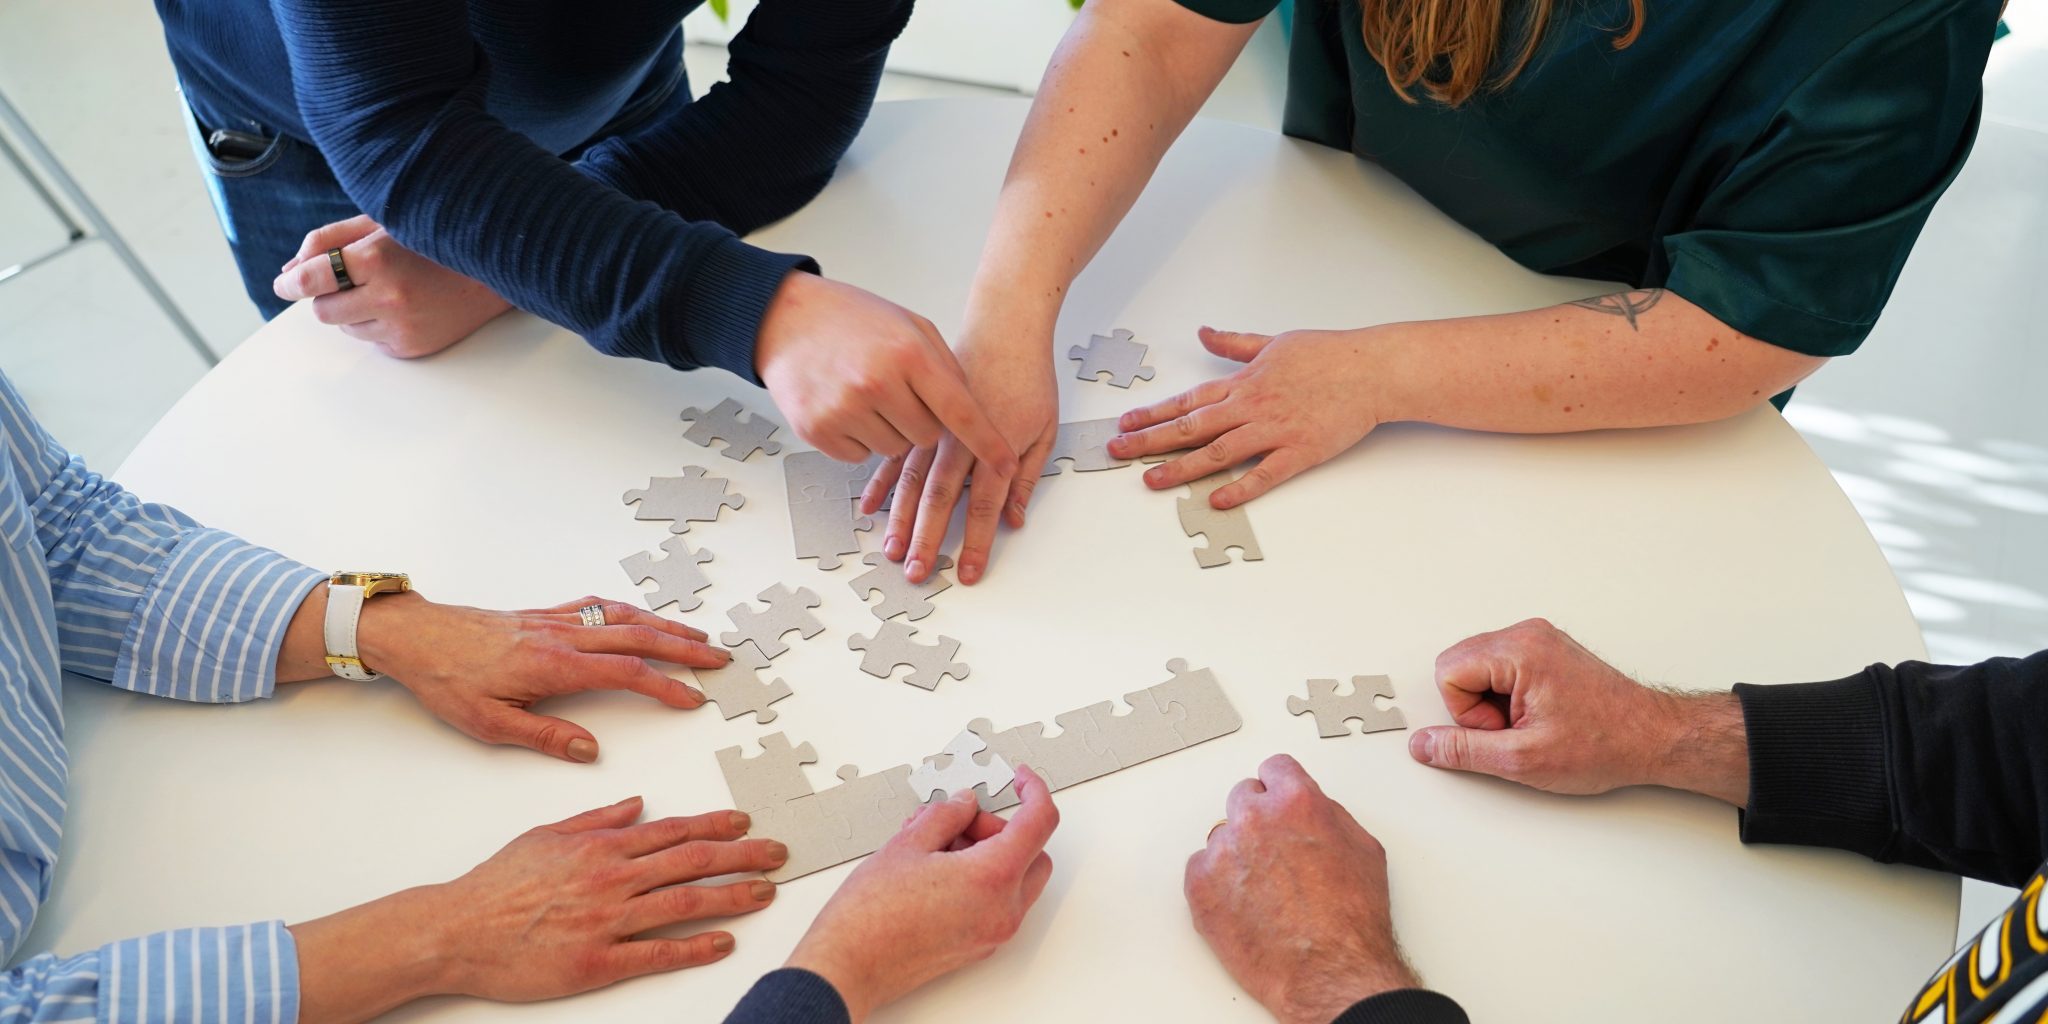 Hands on a table working with pieces of a puzzle together.